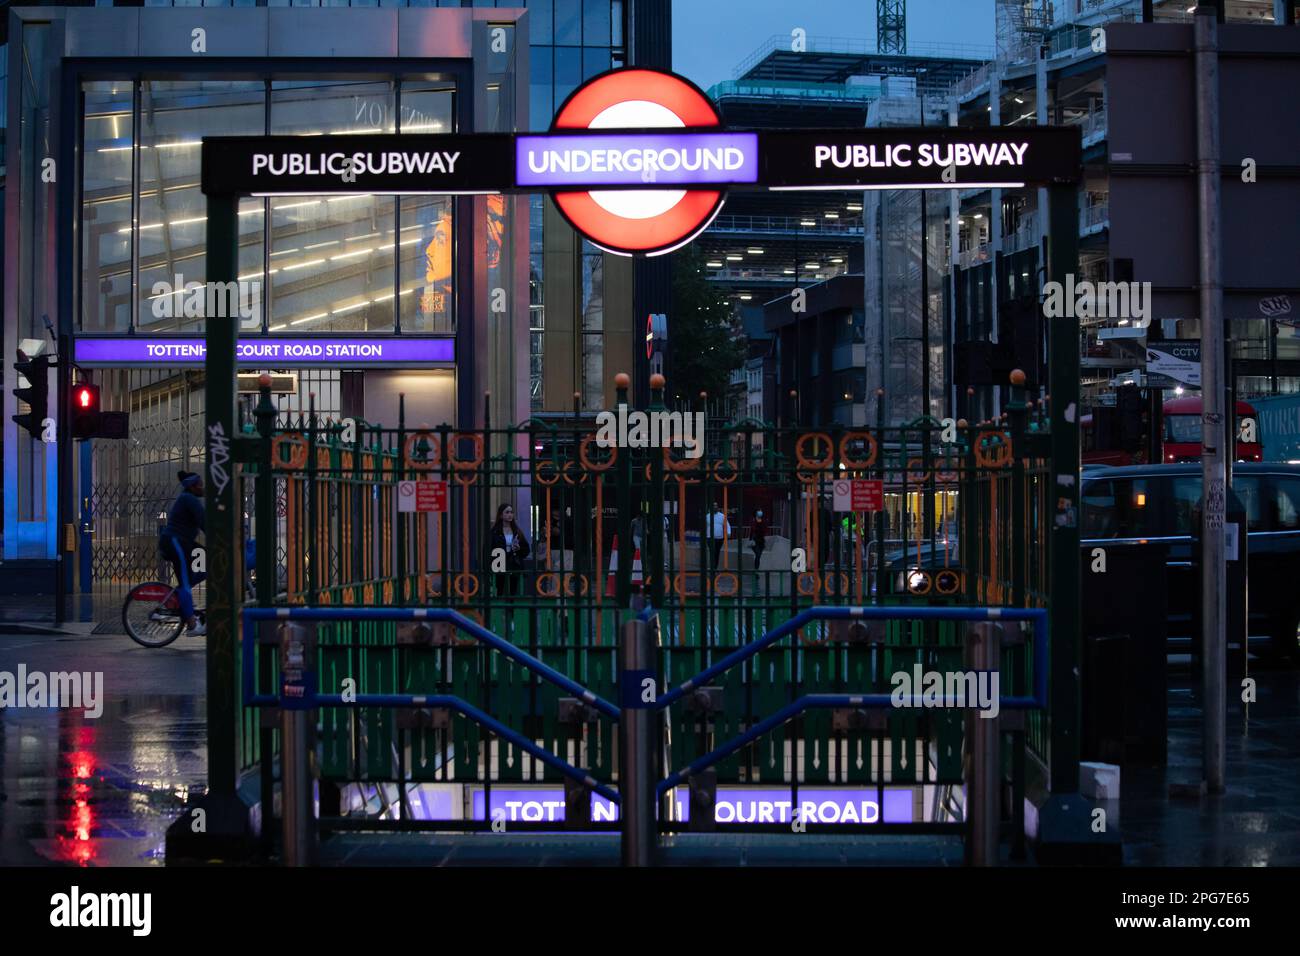 London Underground and Public Subway sign at Tottenham Court Road by night. Busy London street scene with pedestrians, bike, bus, taxi. Stock Photo